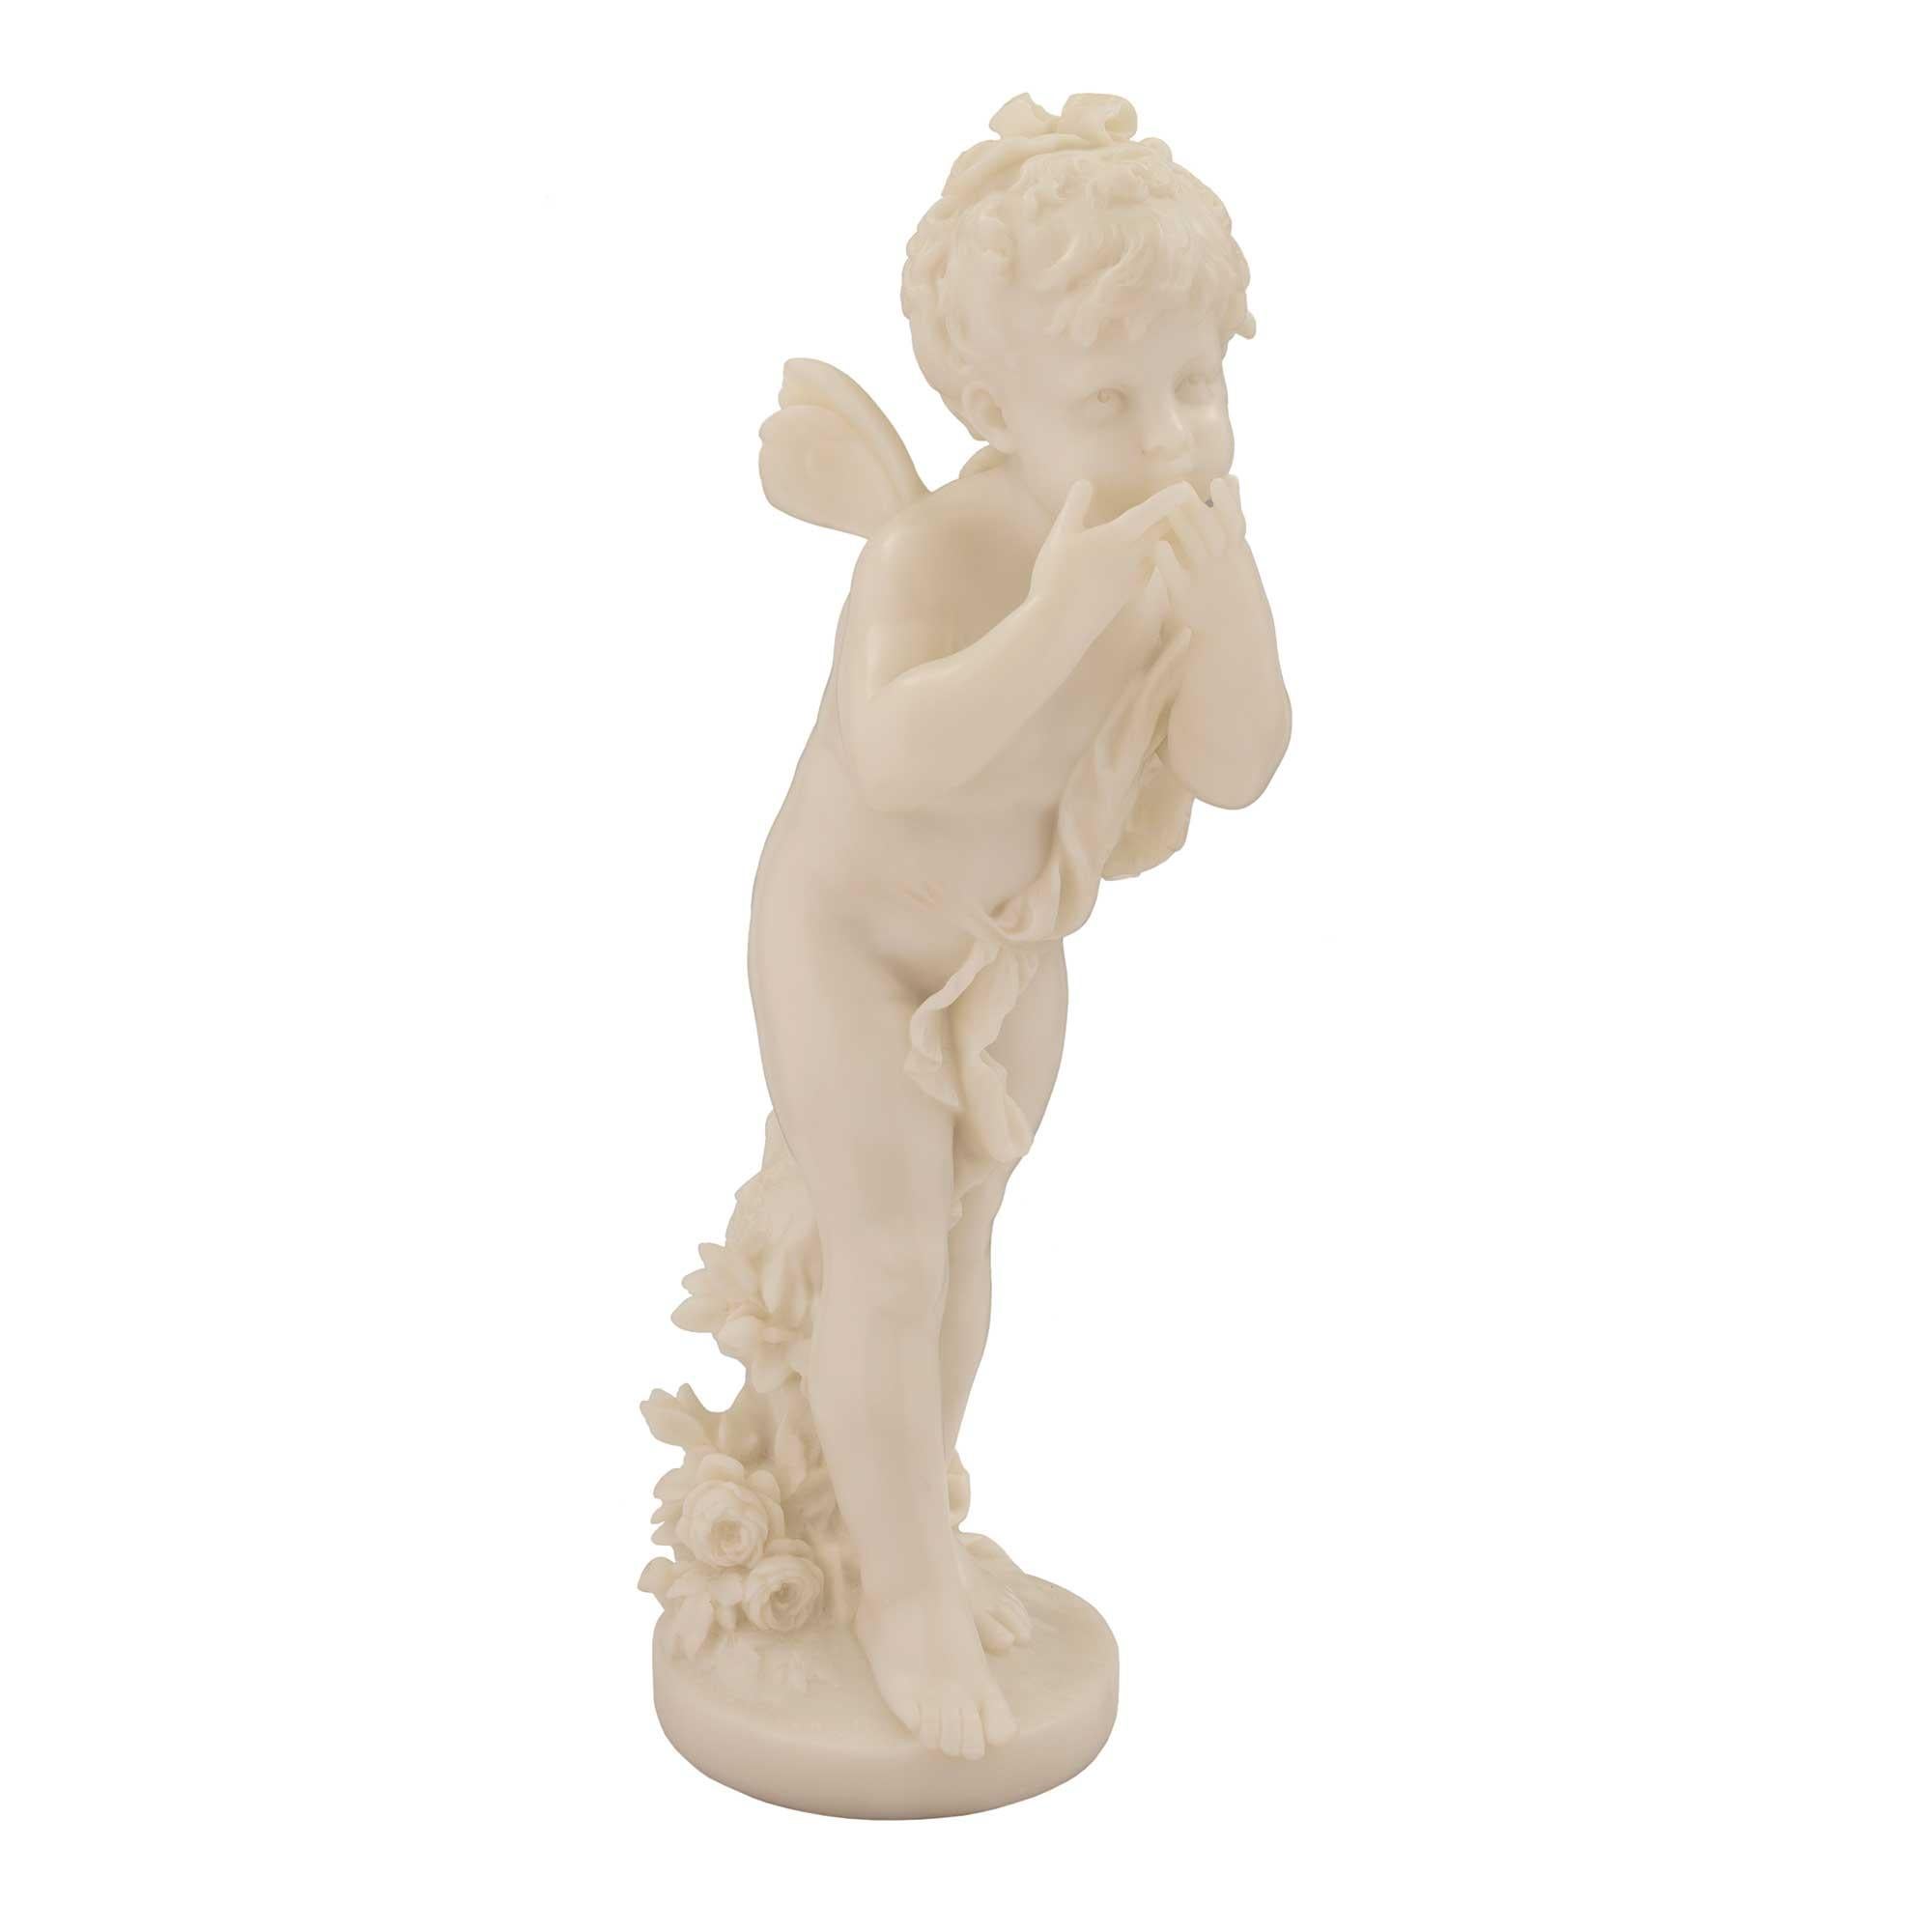 An absolutely charming and well executed Italian mid 19th century white Carrara marble statue of winged girl. The girl is standing above a circular base with a richly carved bouquet of flowers. She is holding up her arms to her face as if she was